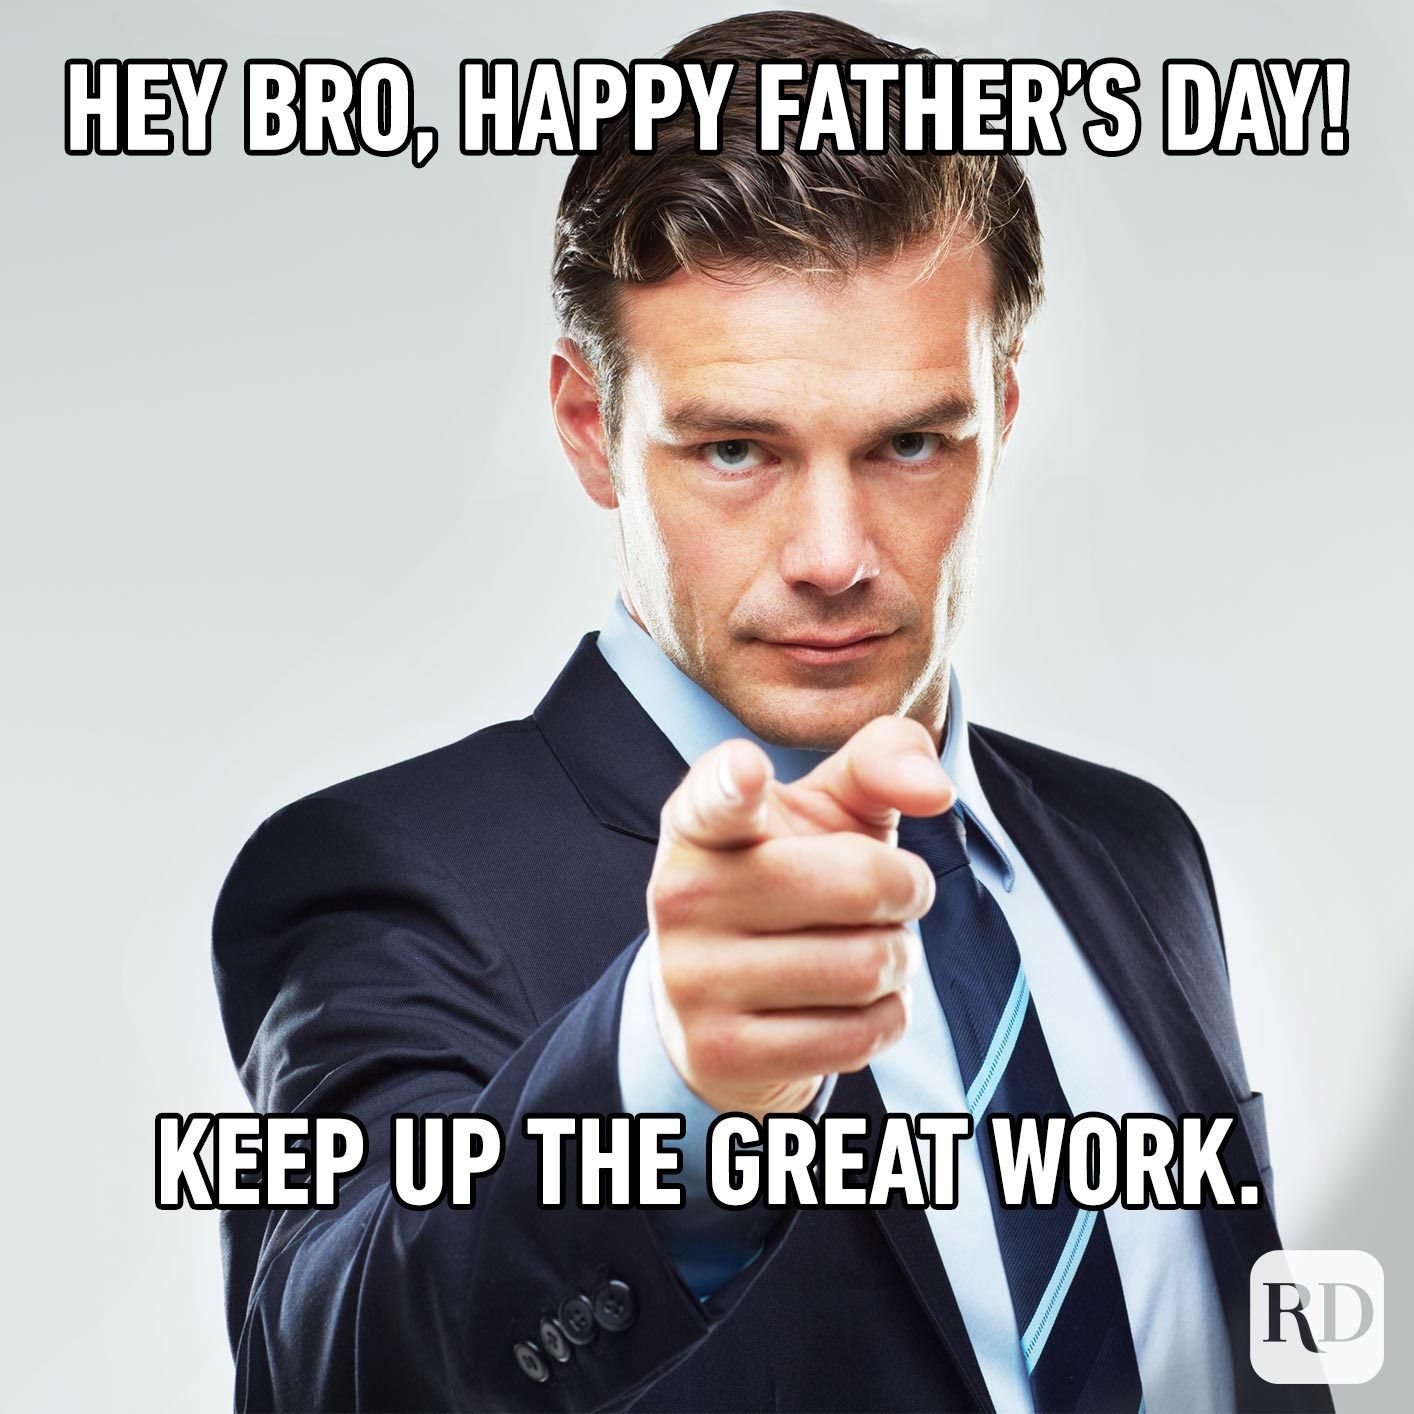 Man pointing at camera. Meme text: Hey bro, Happy Father’s Day